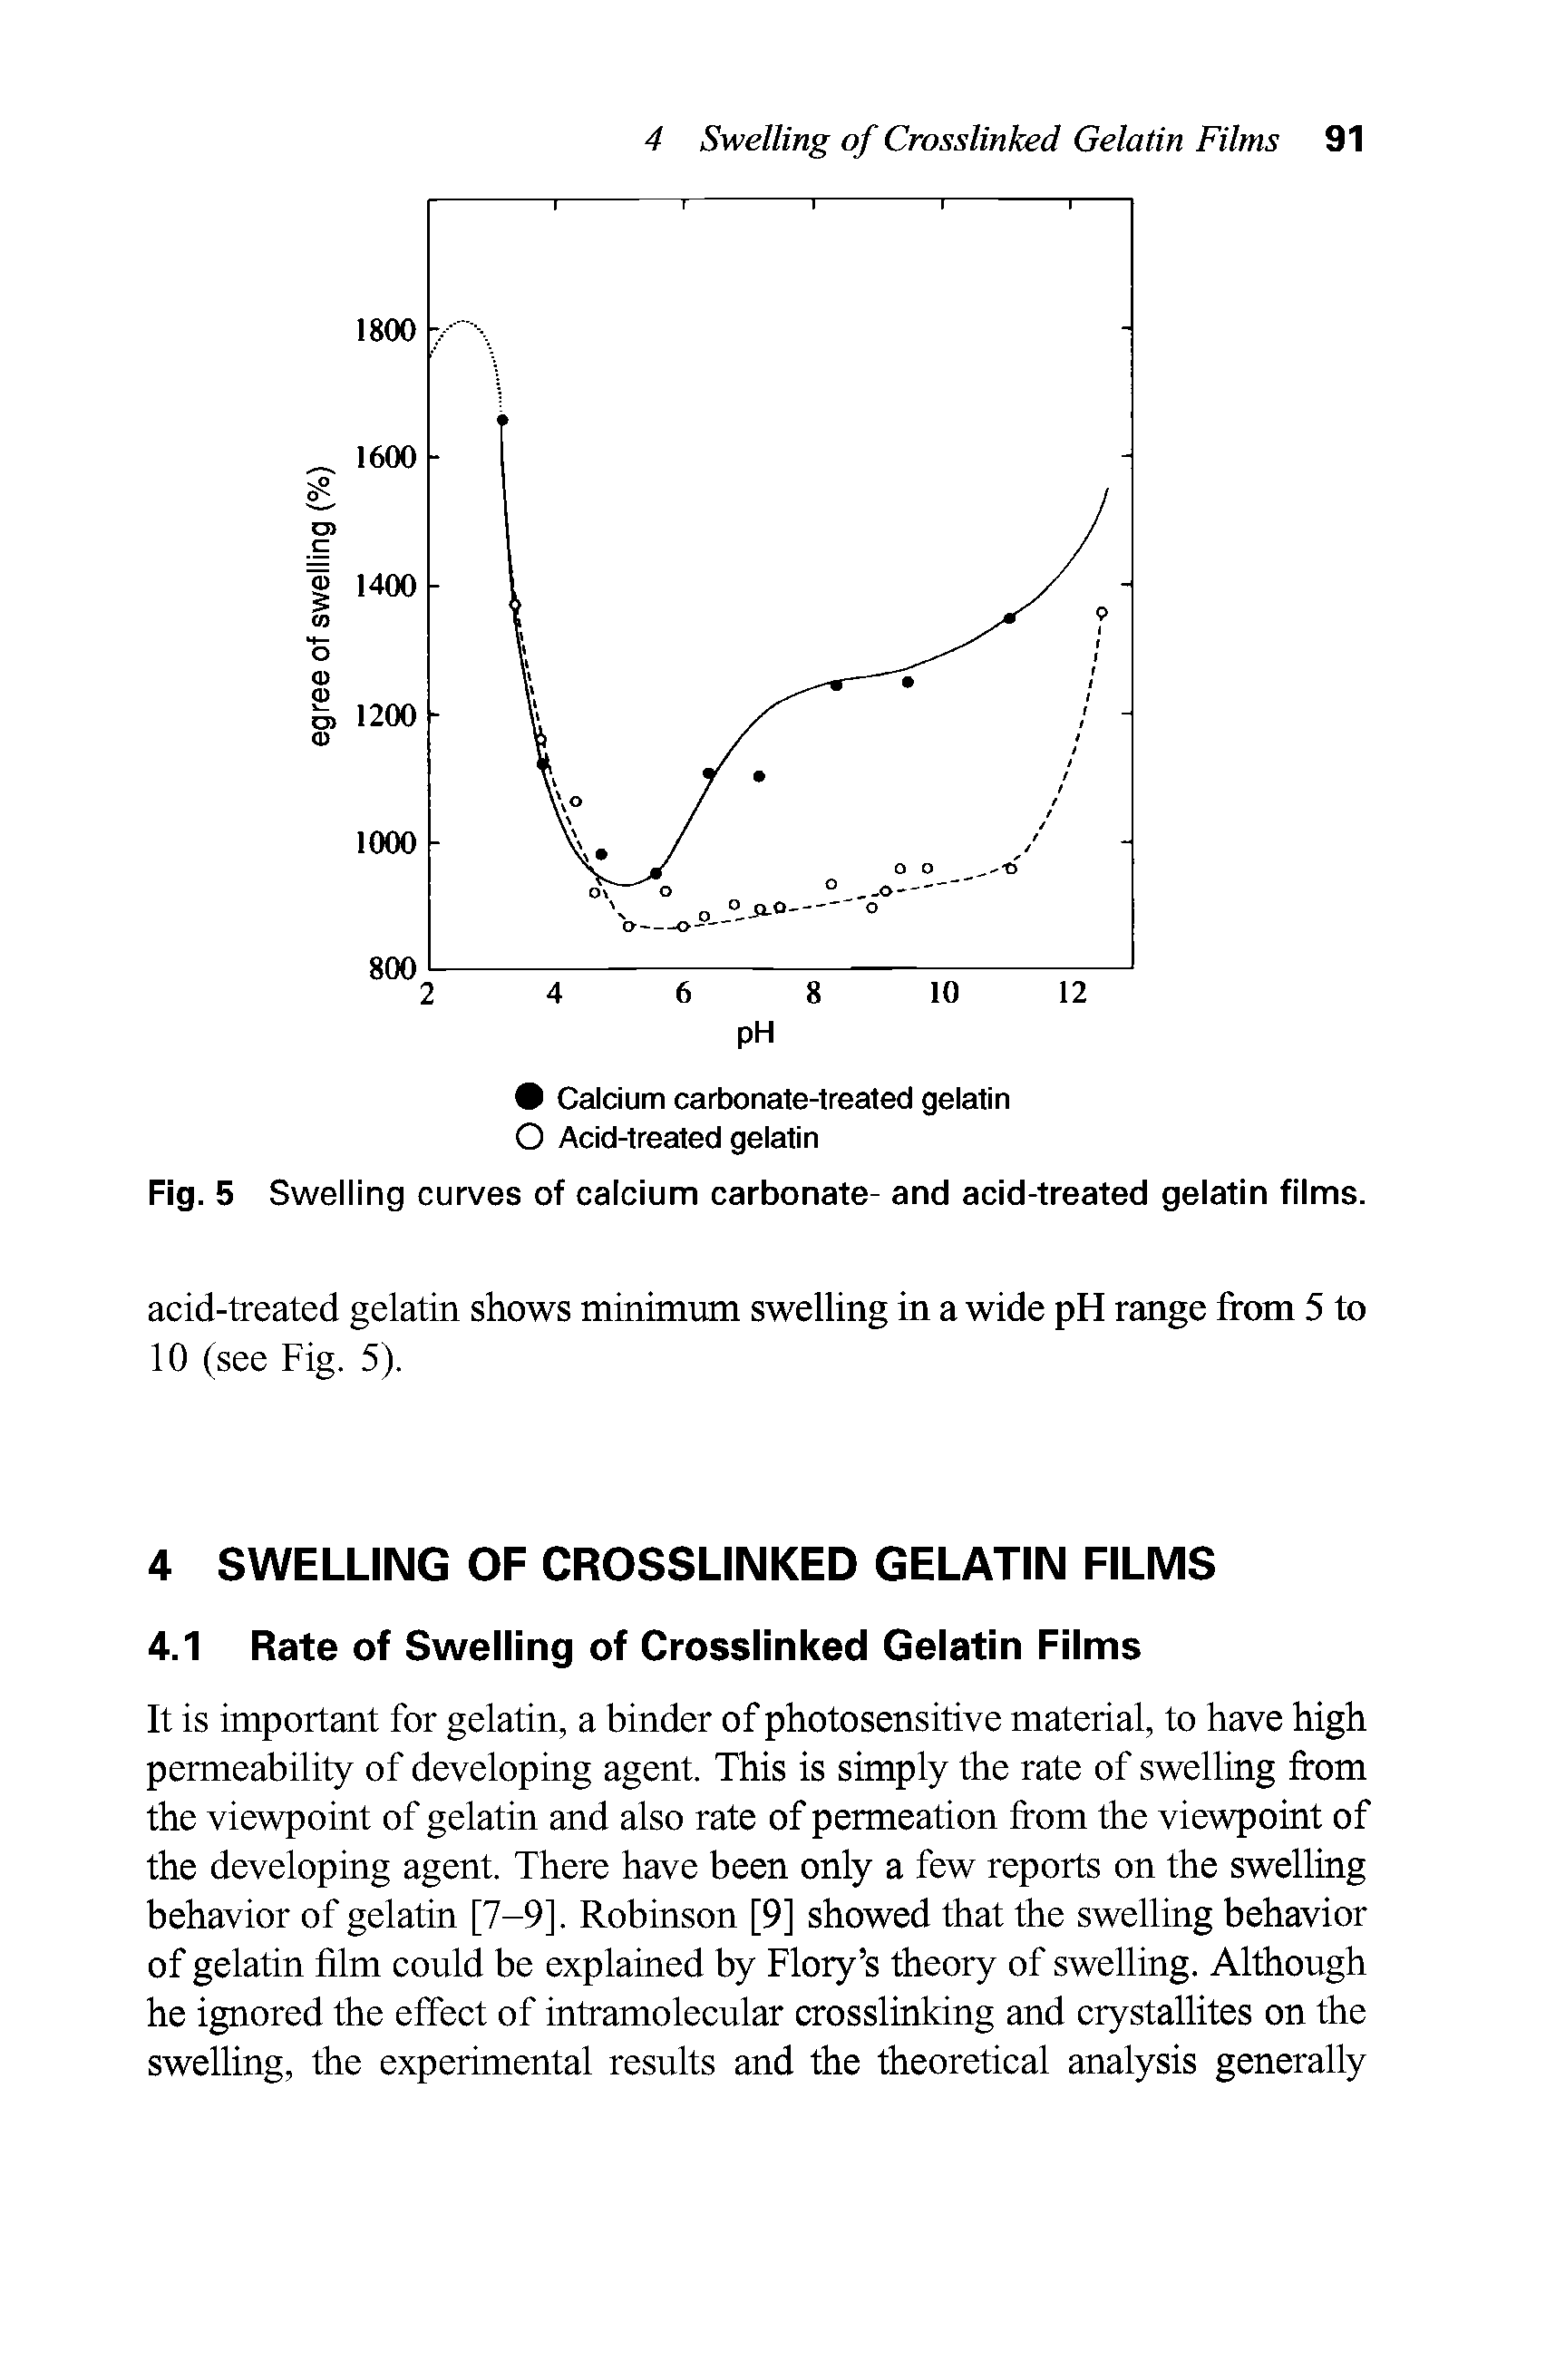 Fig. 5 Swelling curves of calcium carbonate- and acid-treated gelatin films.